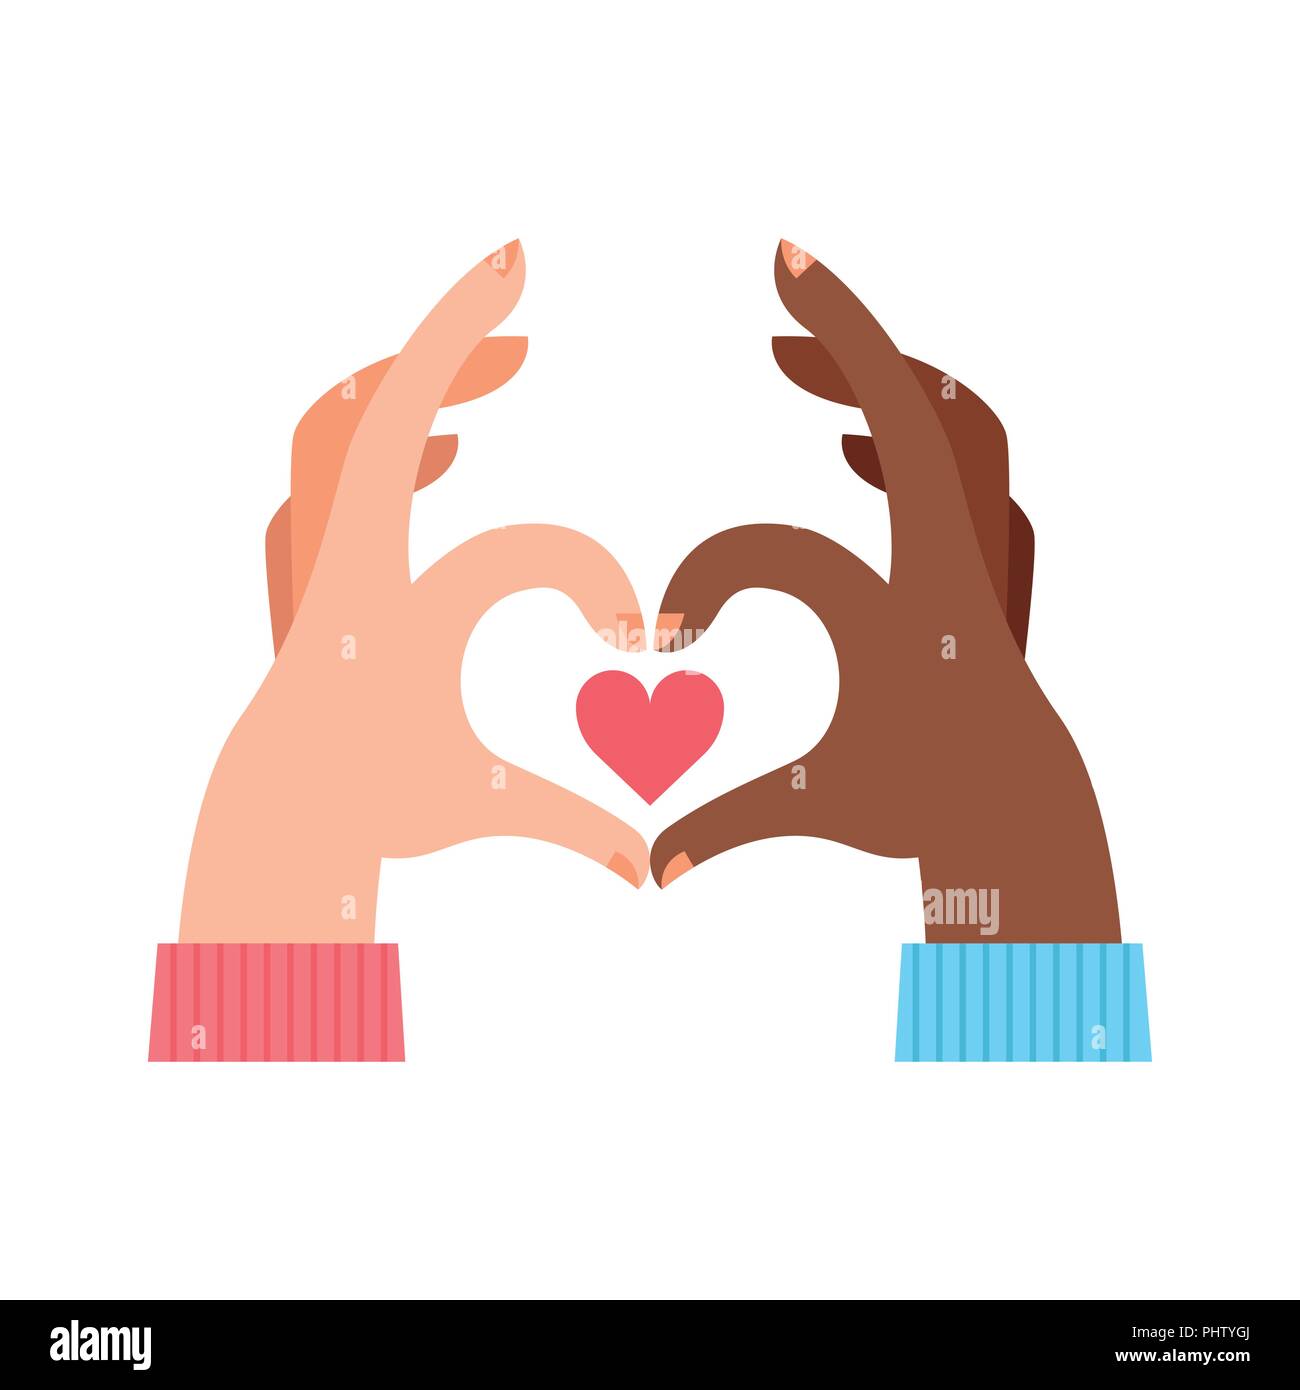 Hands making heart shape hand sign, illustration for social network like button, health awareness or romantic concept on isolated background. EPS10 ve Stock Vector